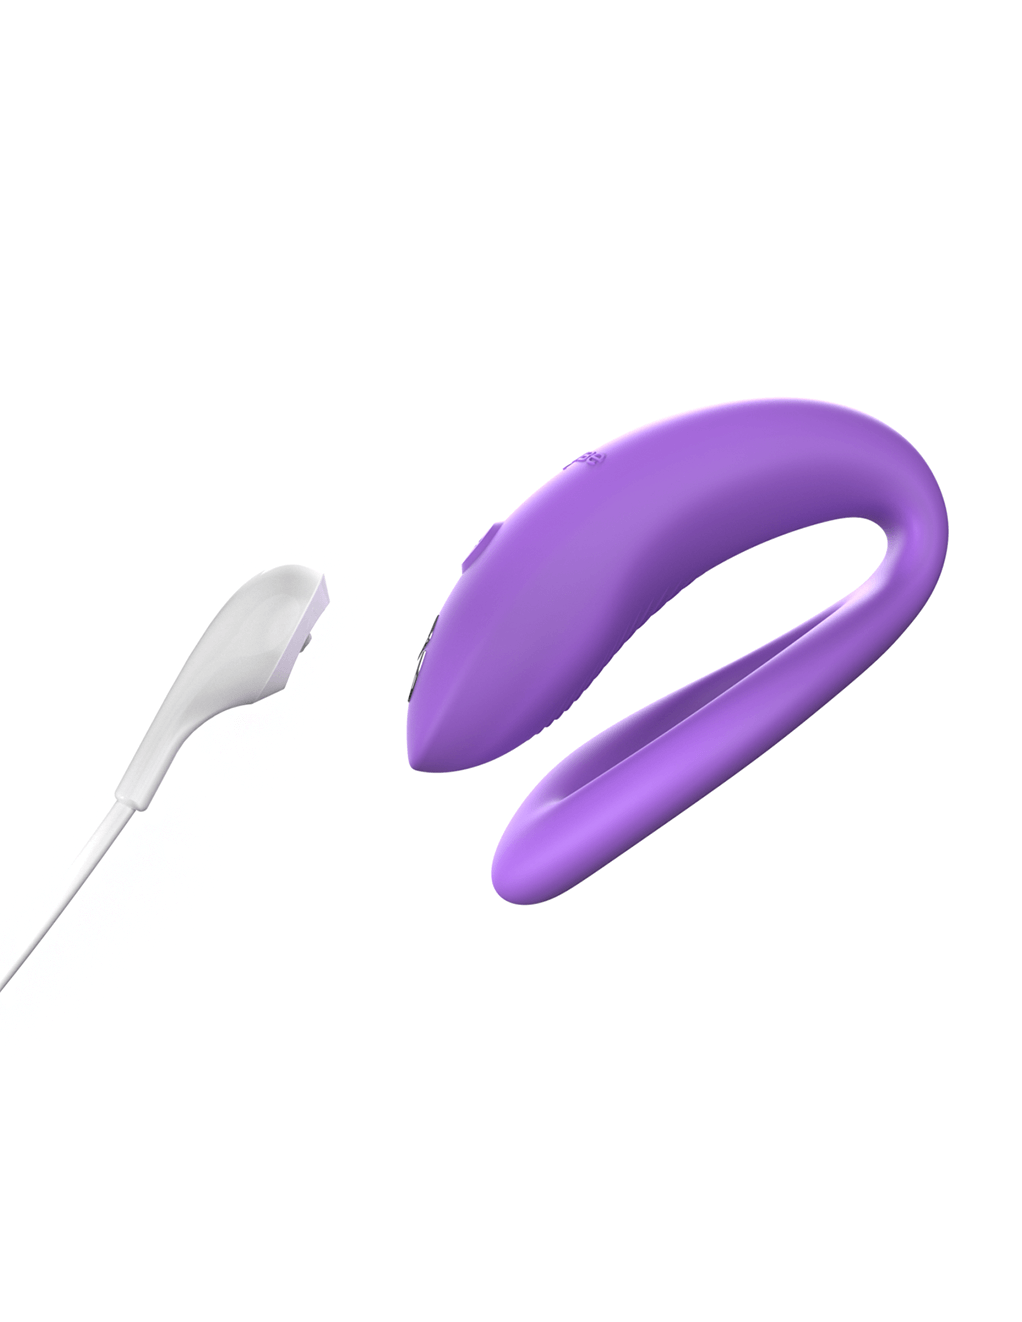 We-Vibe Sync O Couples' Vibrator - Light Purple - With Charger